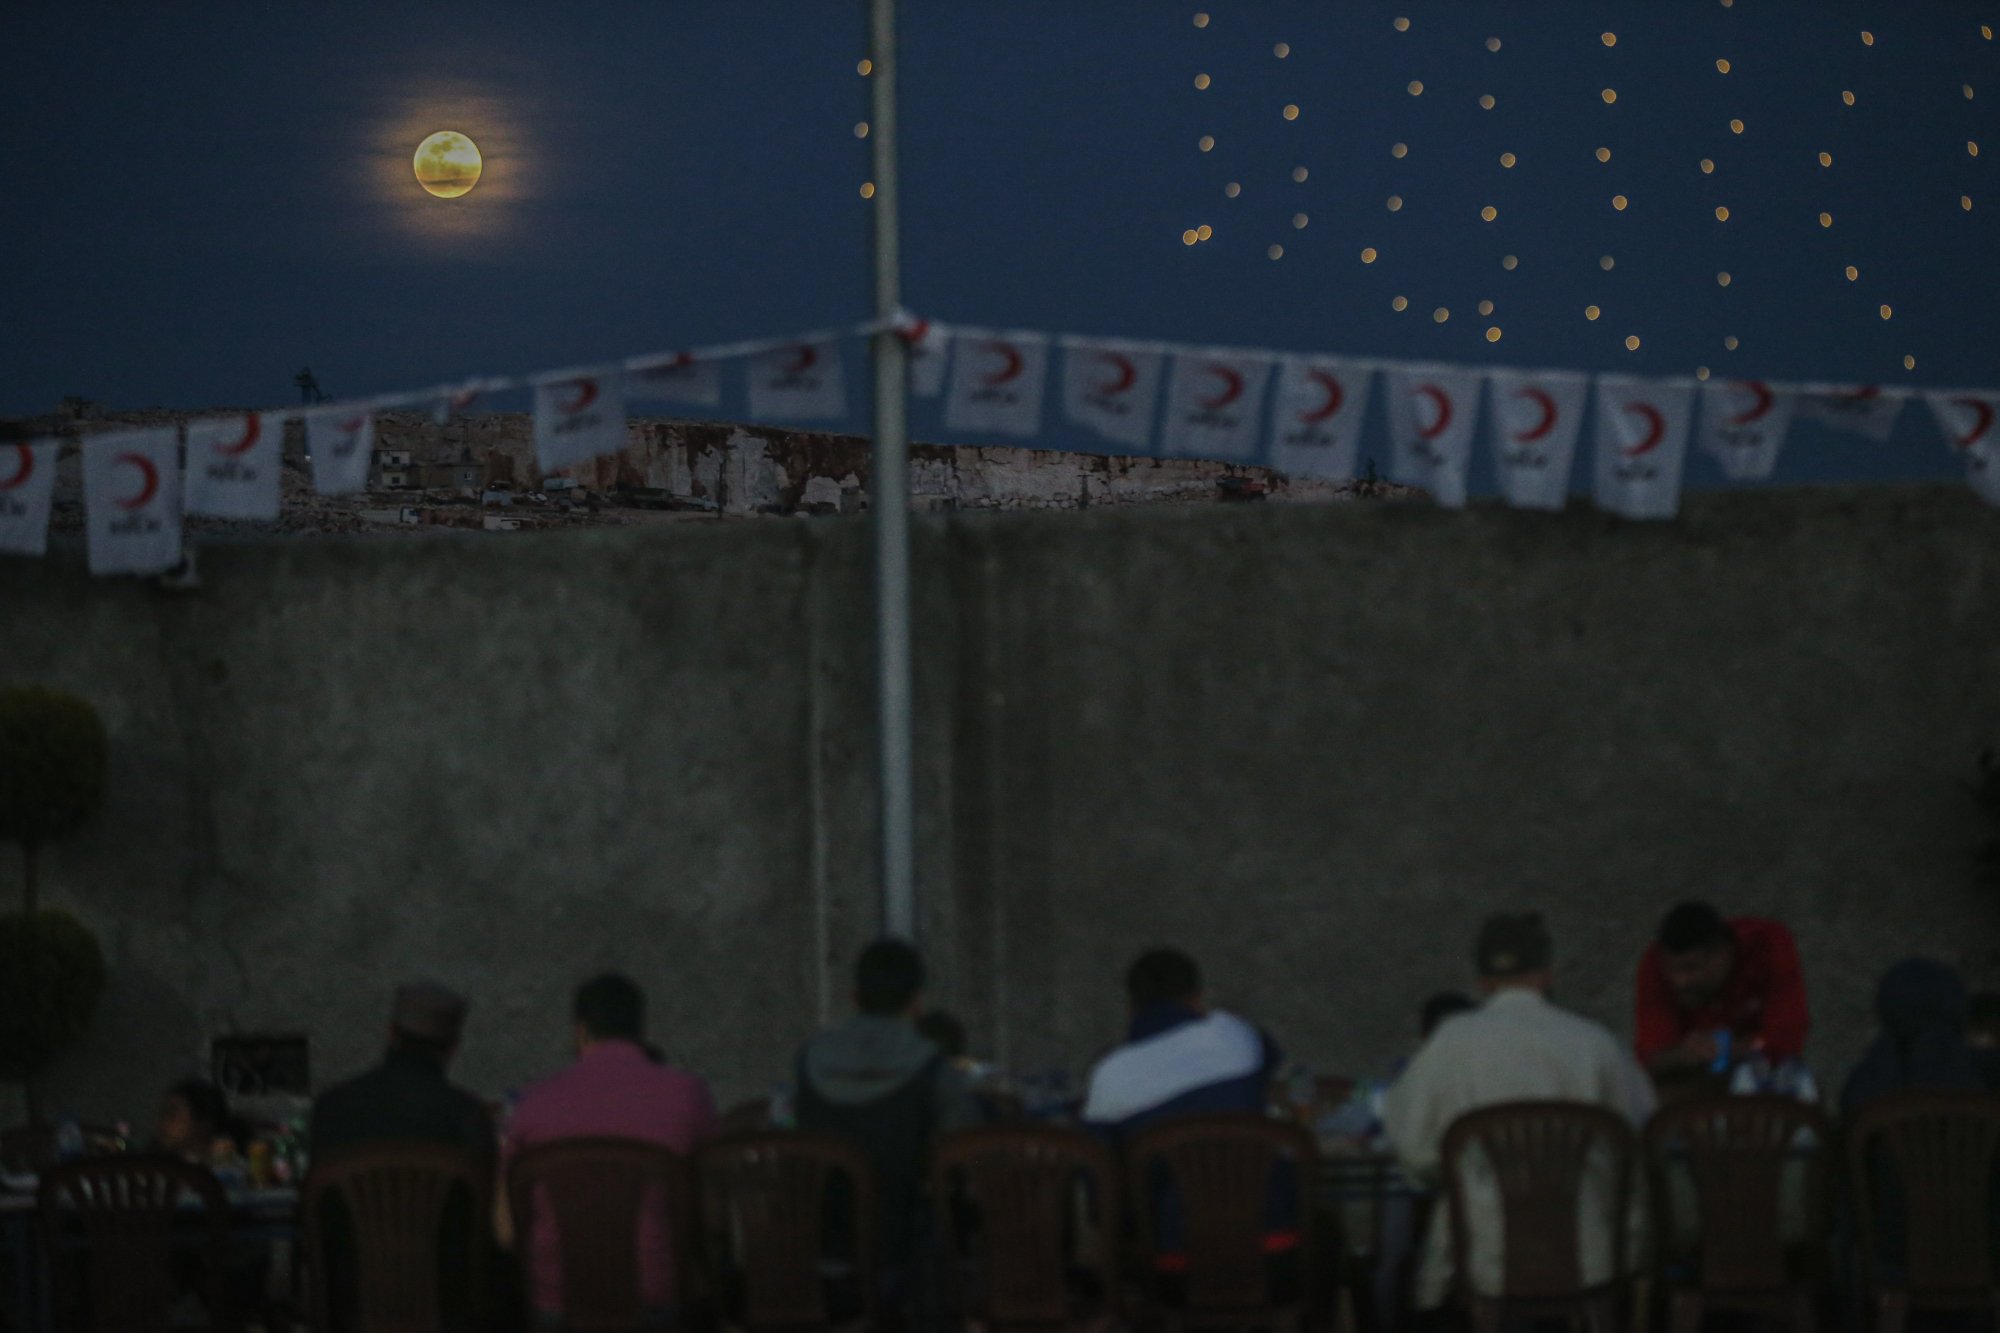 The moon above people sitting at a table with crescent moon flags.